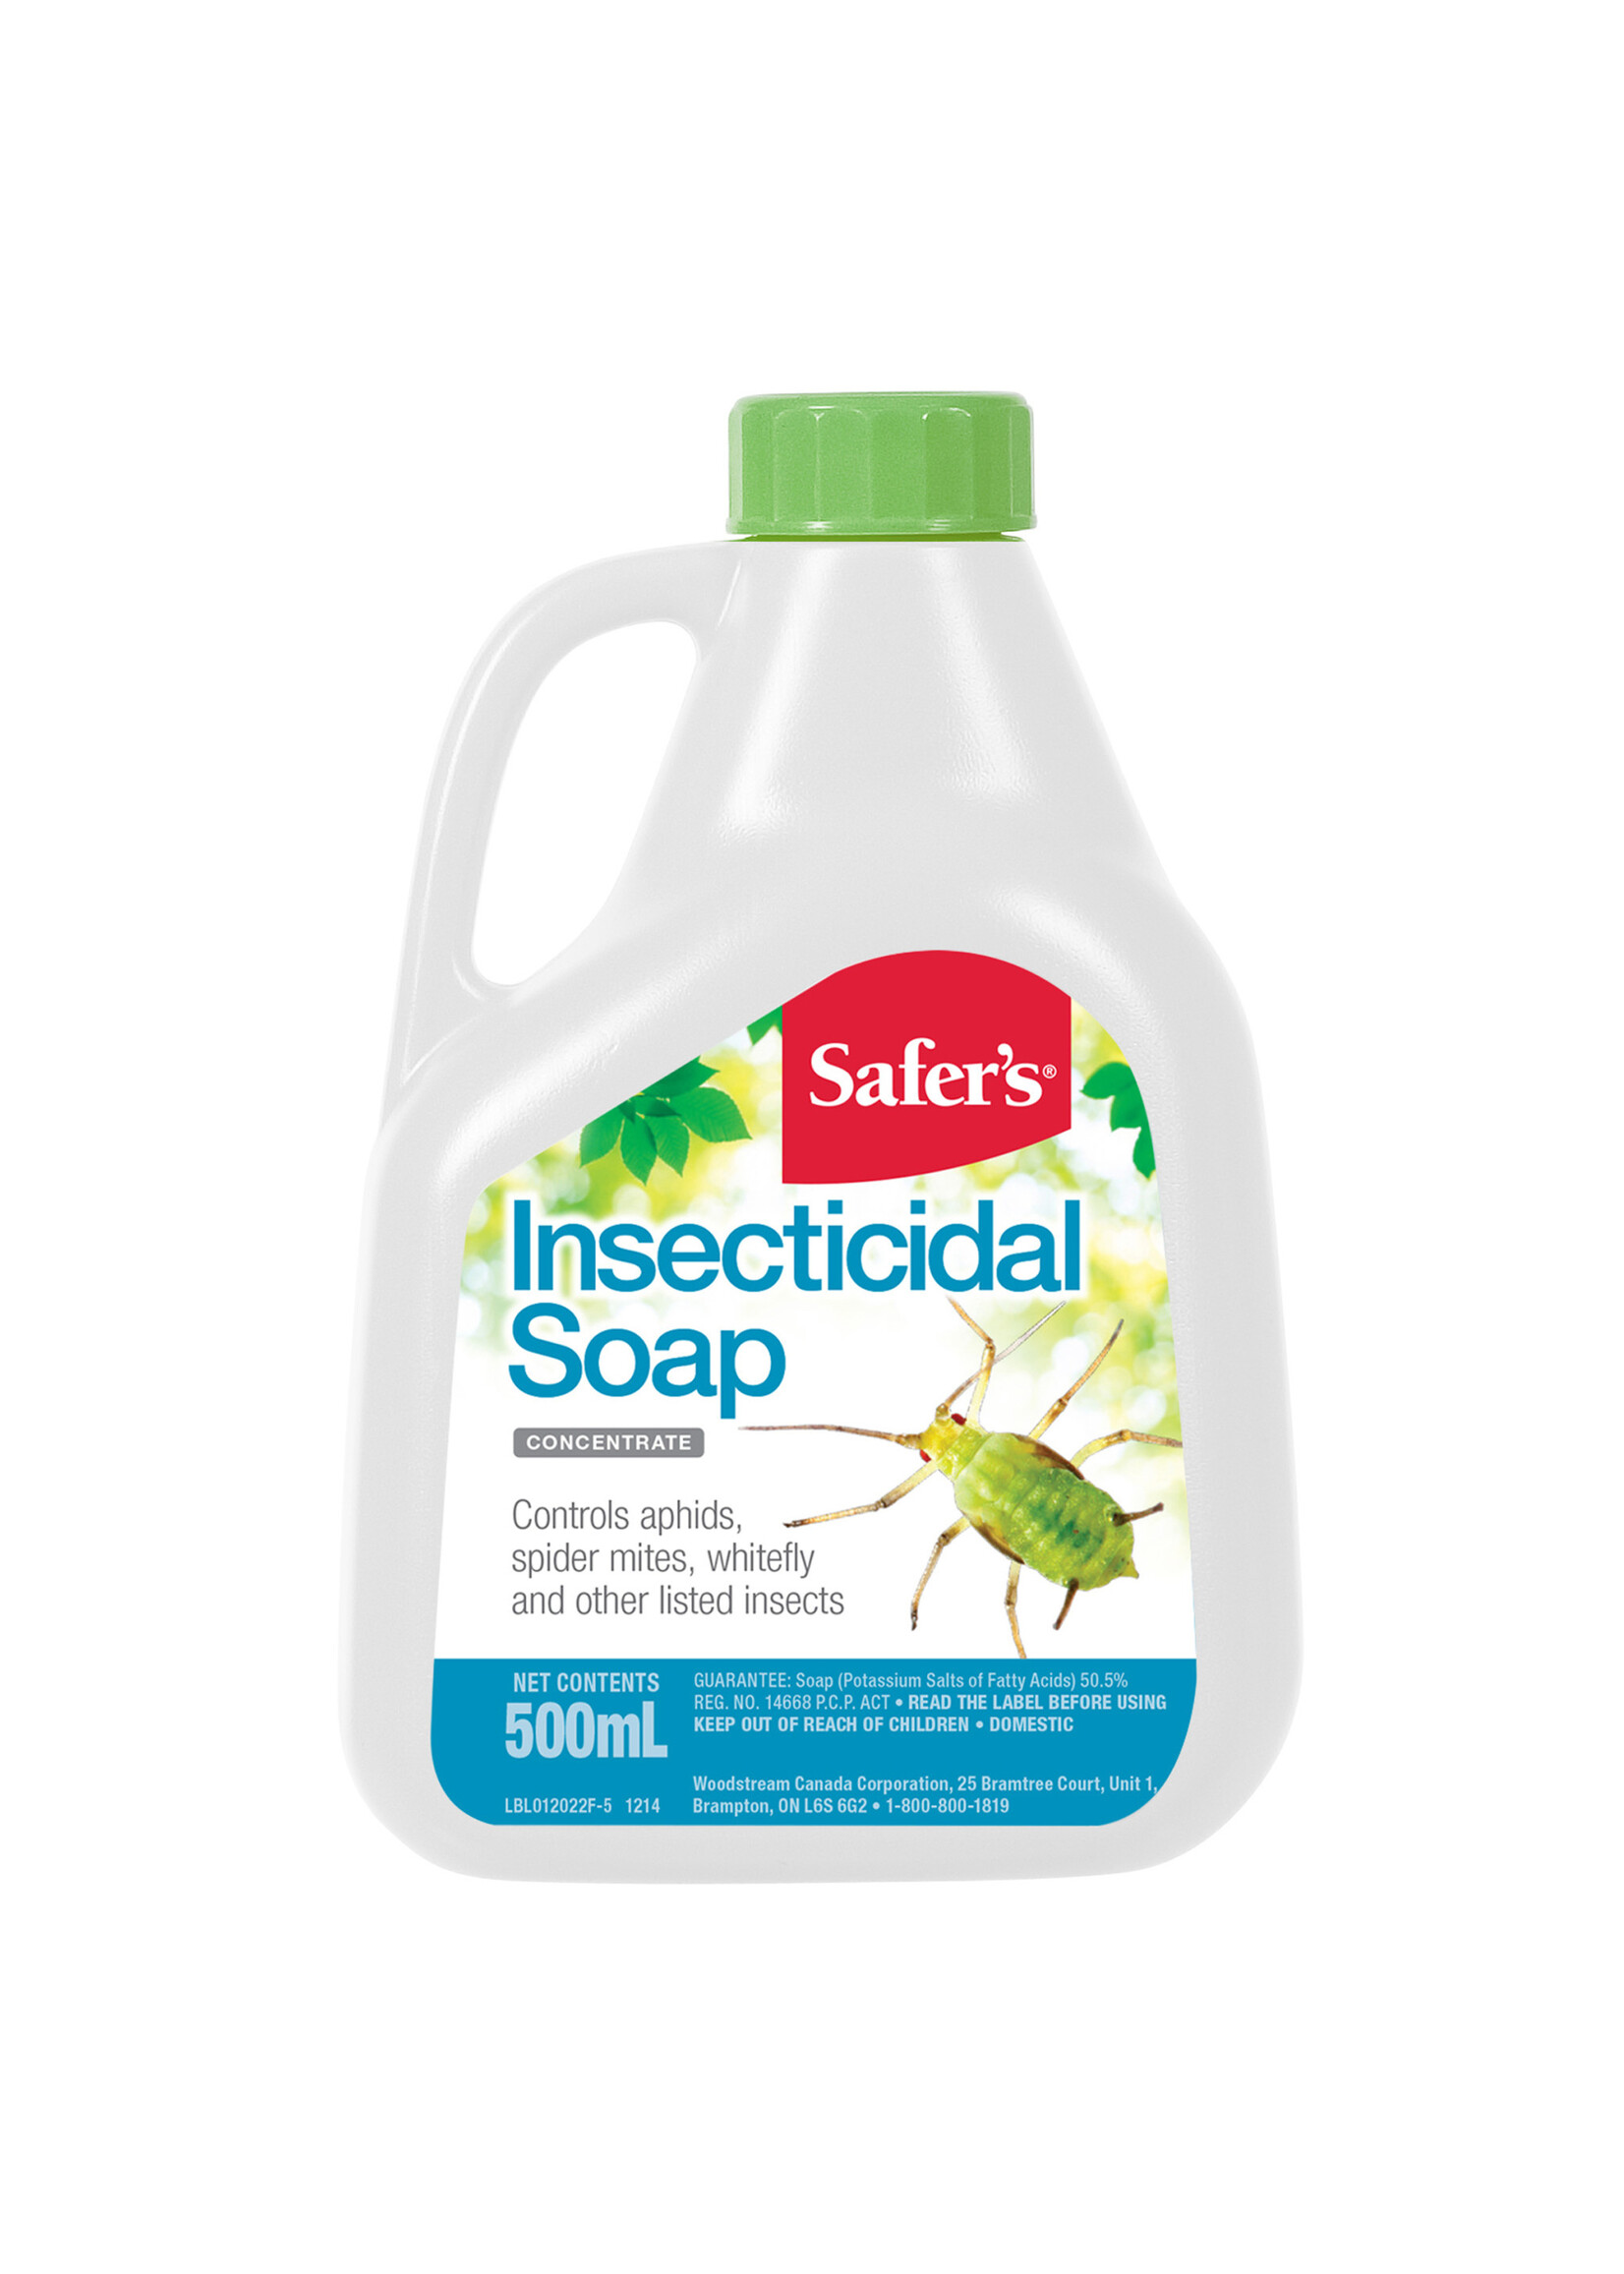 Safers Safer's Insecticidal Soap Concentrate 500ml